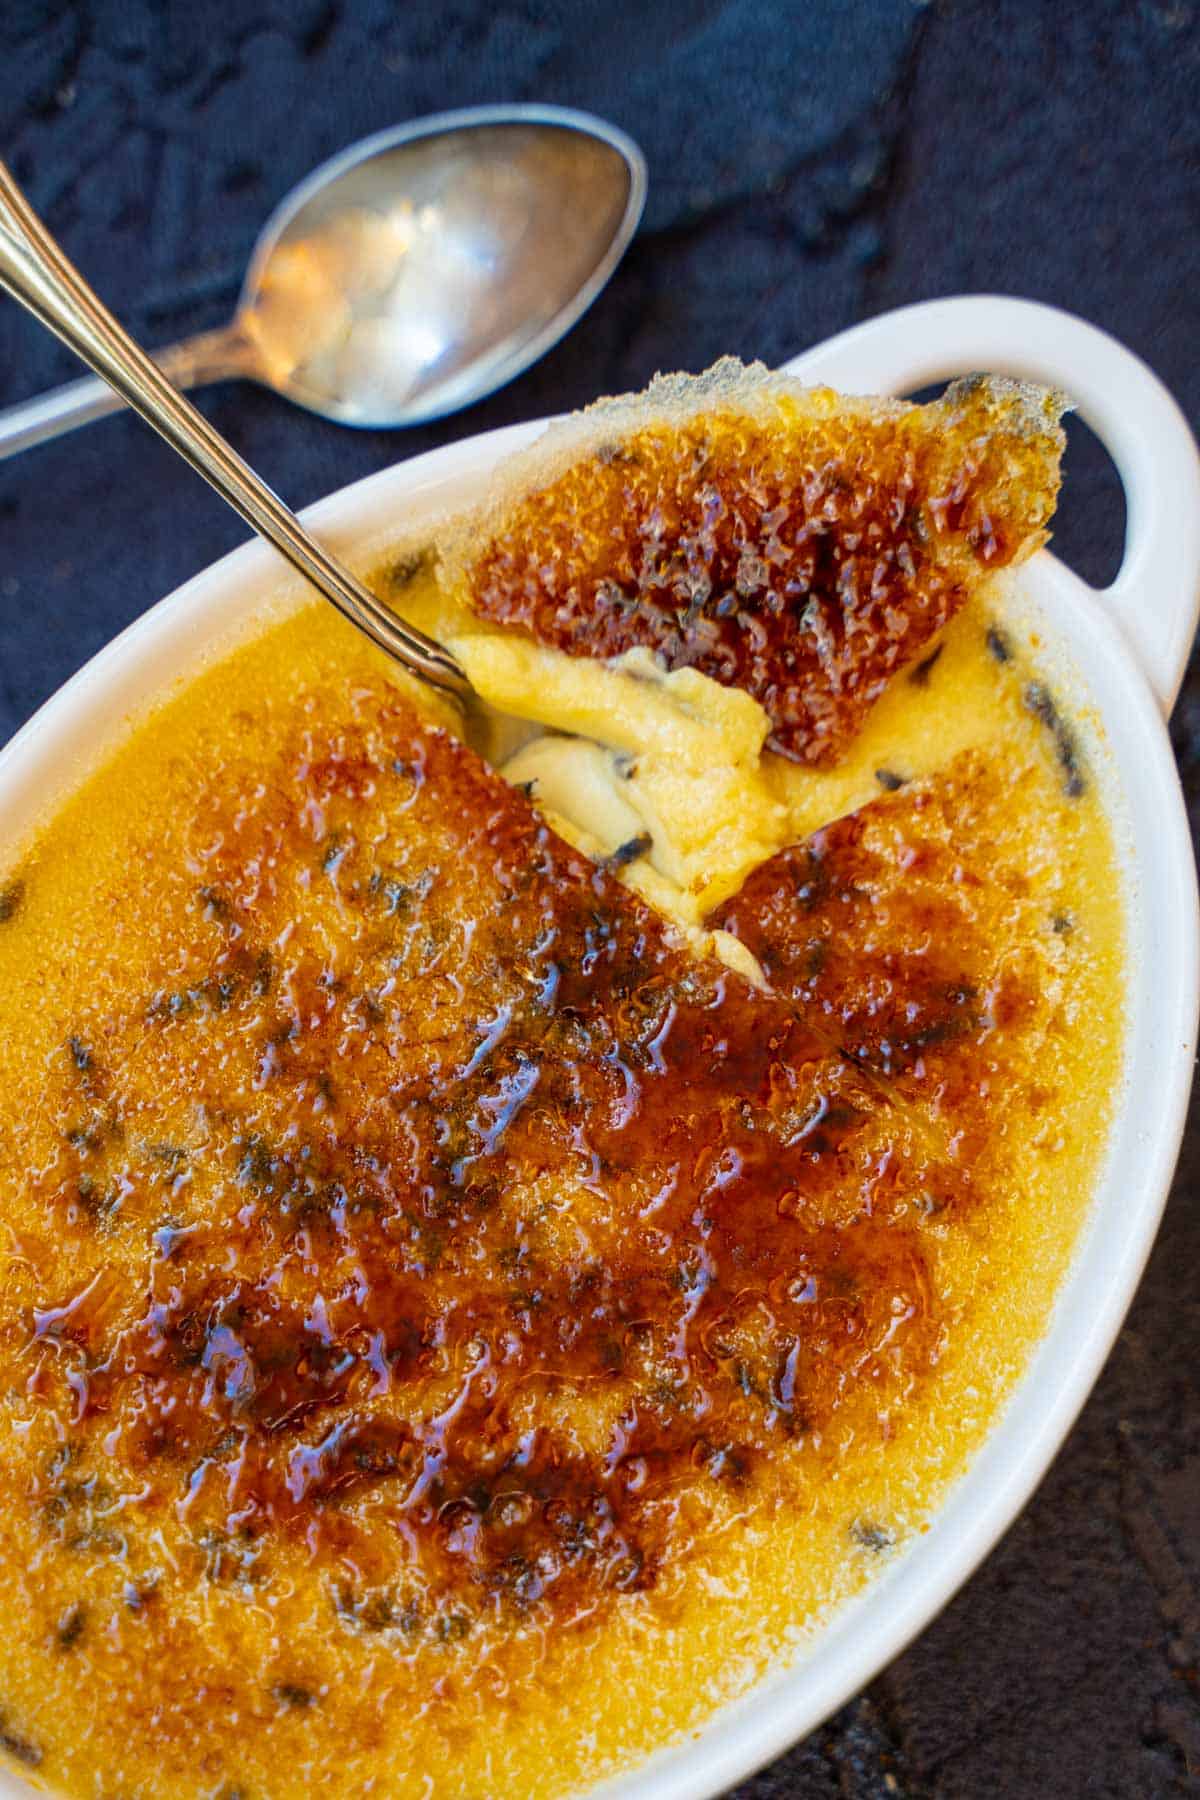 Easy creme brulee recipe for 2 with a spoon cracking into the caramelized sugar topping.